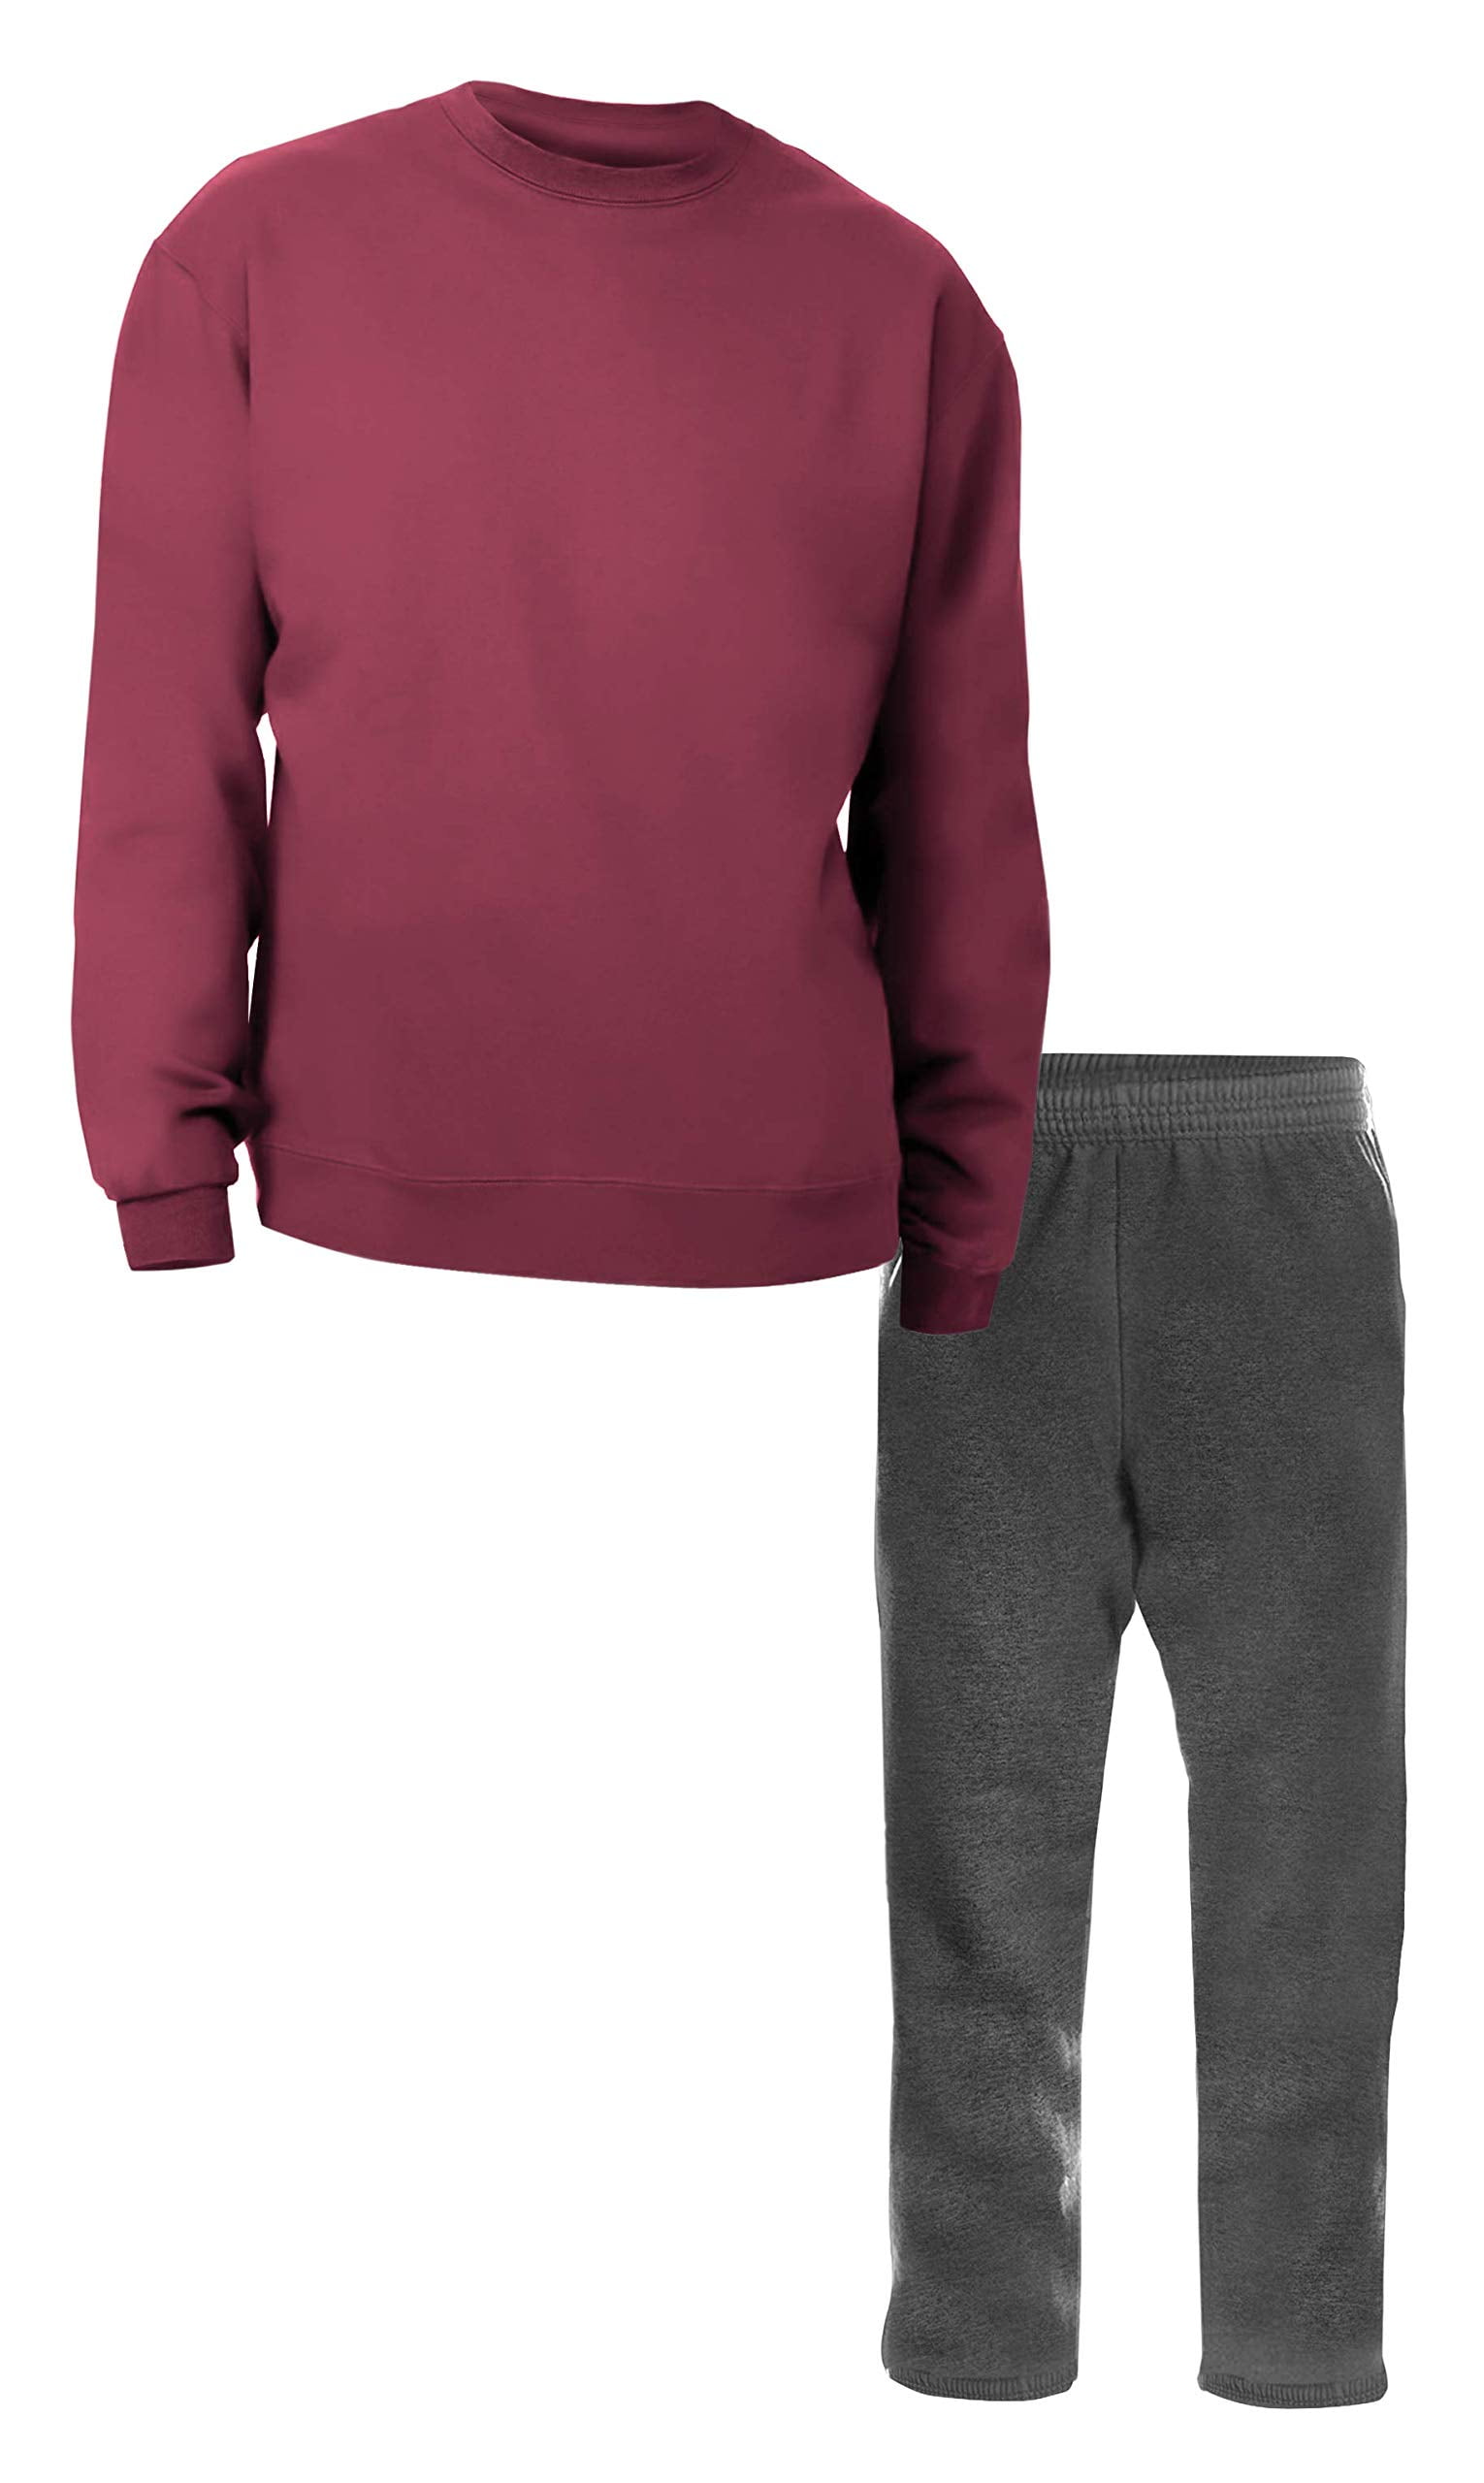 Hanes comfortsoft sweatshirt and sweatpants set men maroon top with  charcoal heather pant Pack of 1 